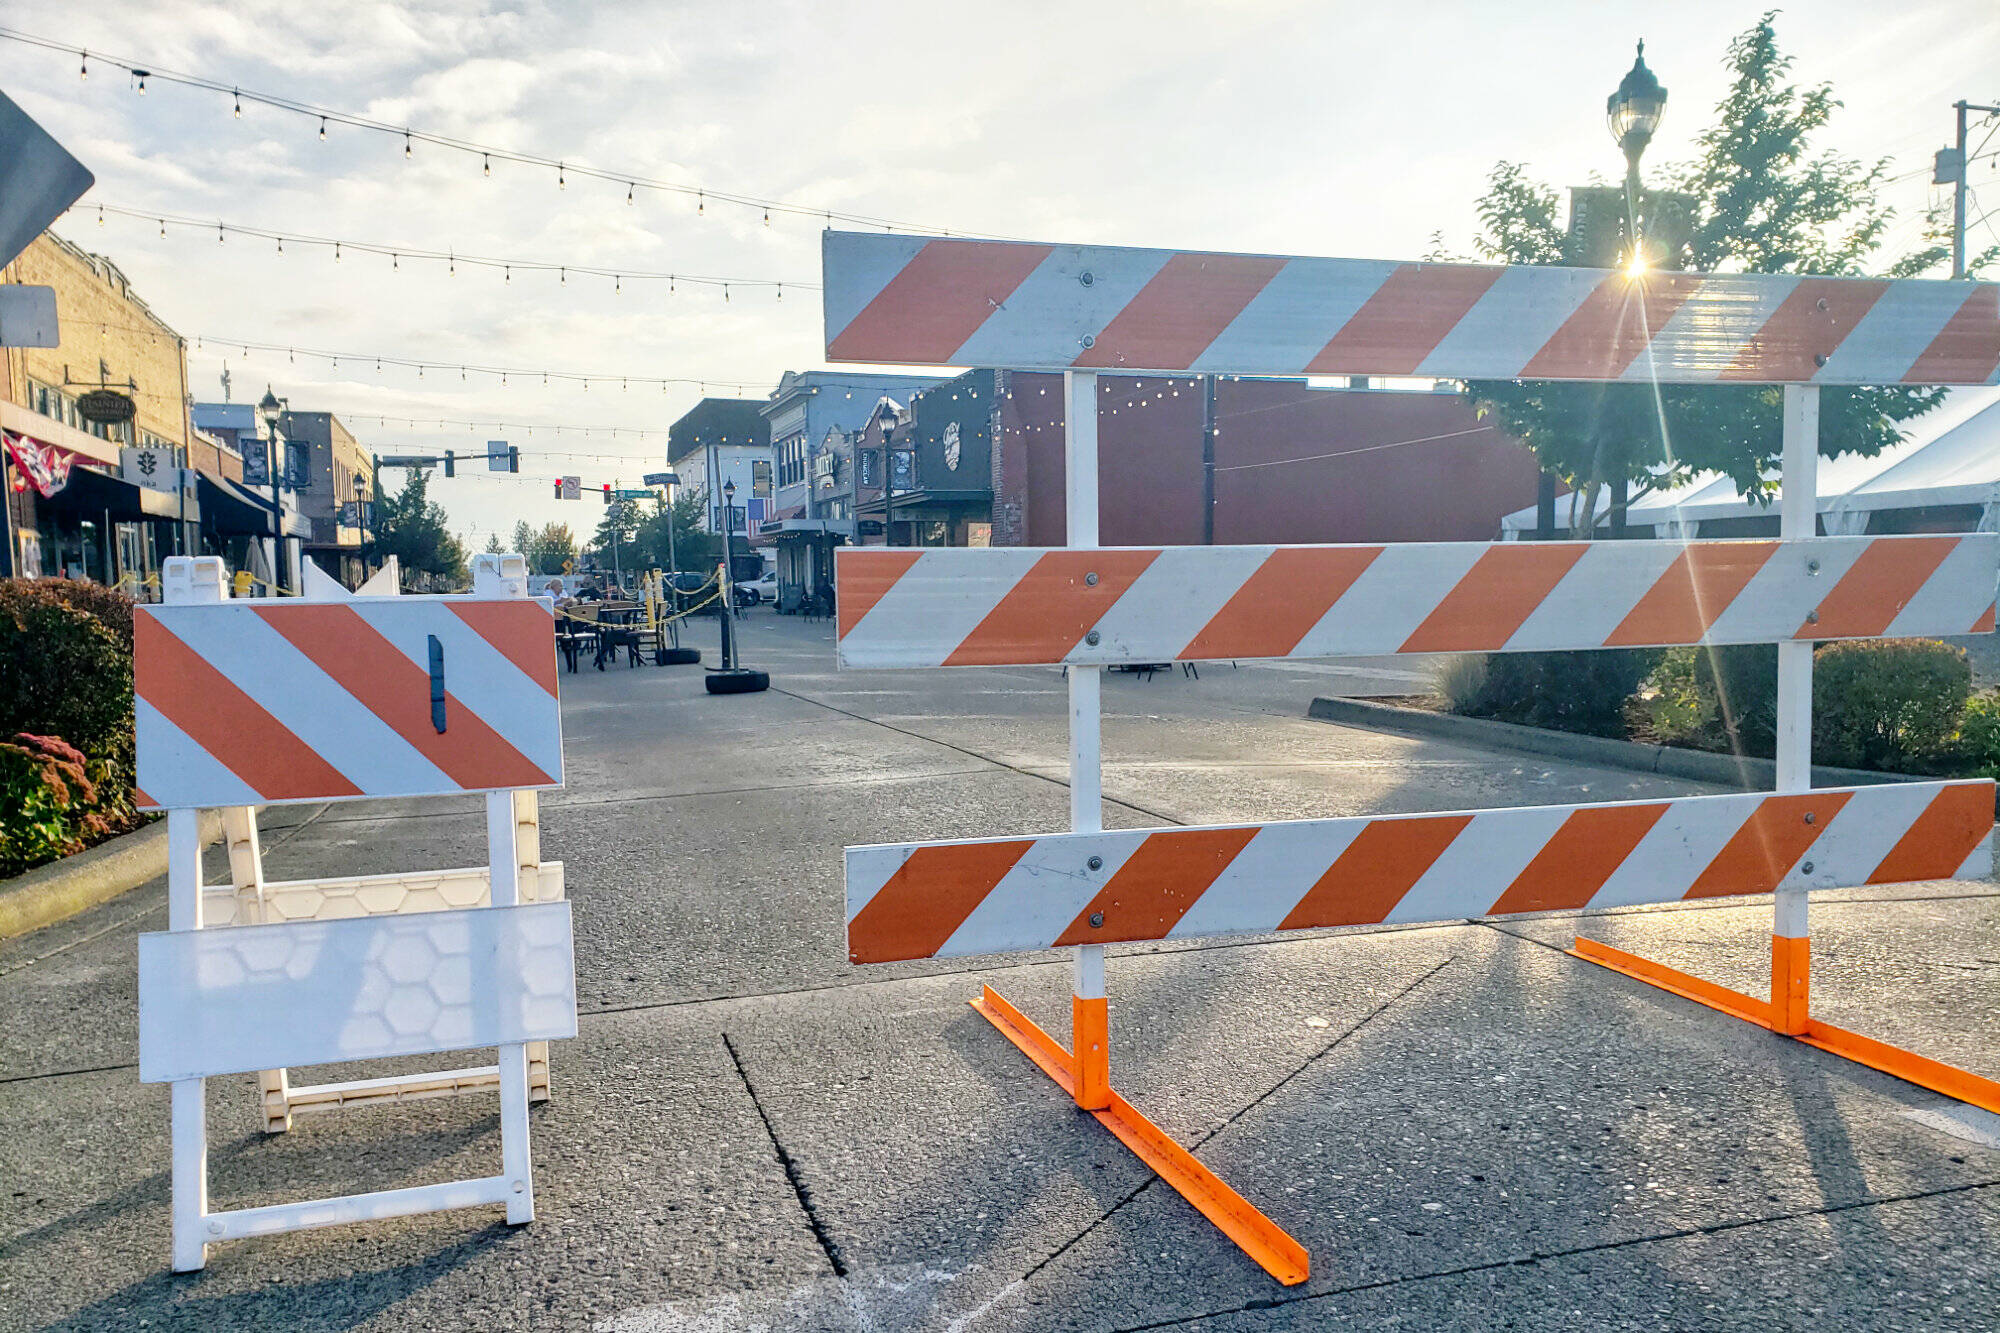 Enumclaw’s Cole Street closes most Fridays through Sundays, barring weather advisories. Photo by Ray Miller-Still
Enumclaw’s Cole Street closes most Fridays through Sundays, barring weather advisories. Photo by Ray Miller-Still